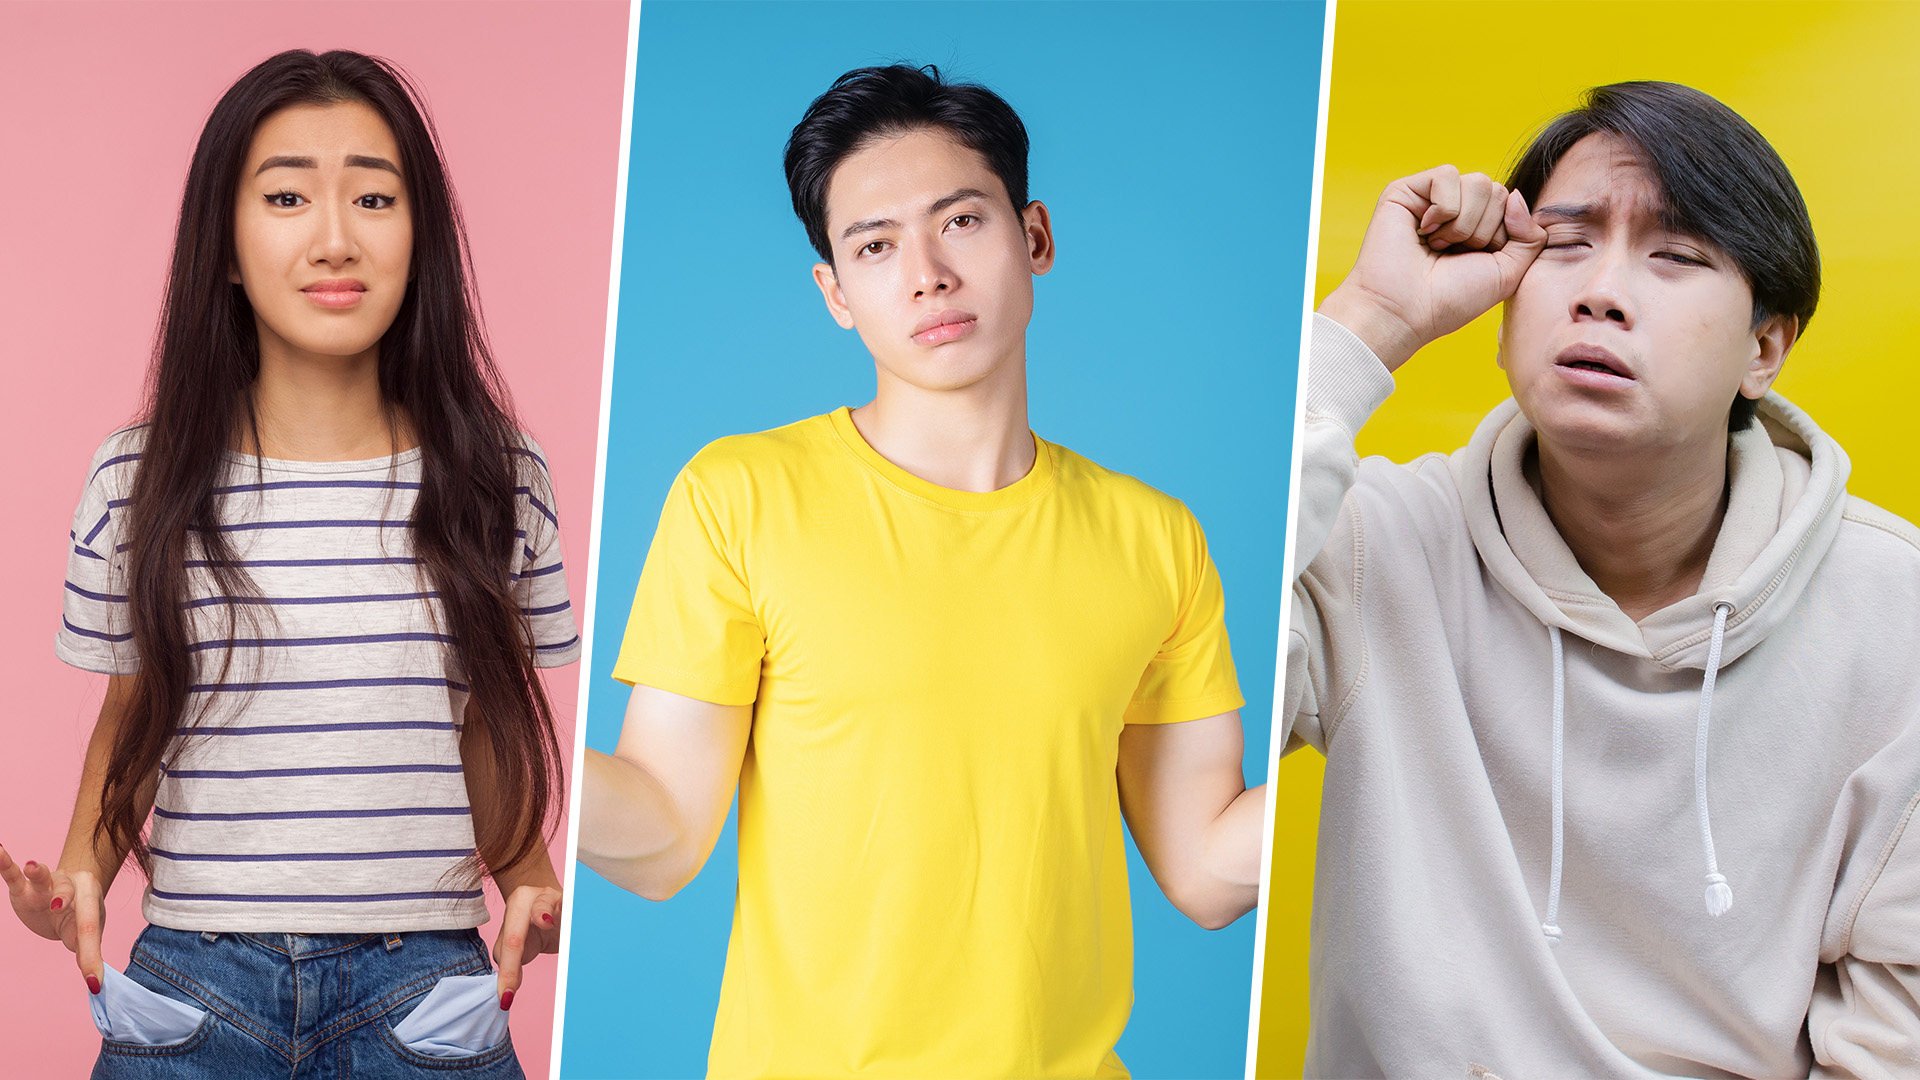 Growing numbers of people in China are choosing to laud losers instead of good-looking, successful characters in films and TV series. The Post explains why. Photo: SCMP composite/Shutterstock